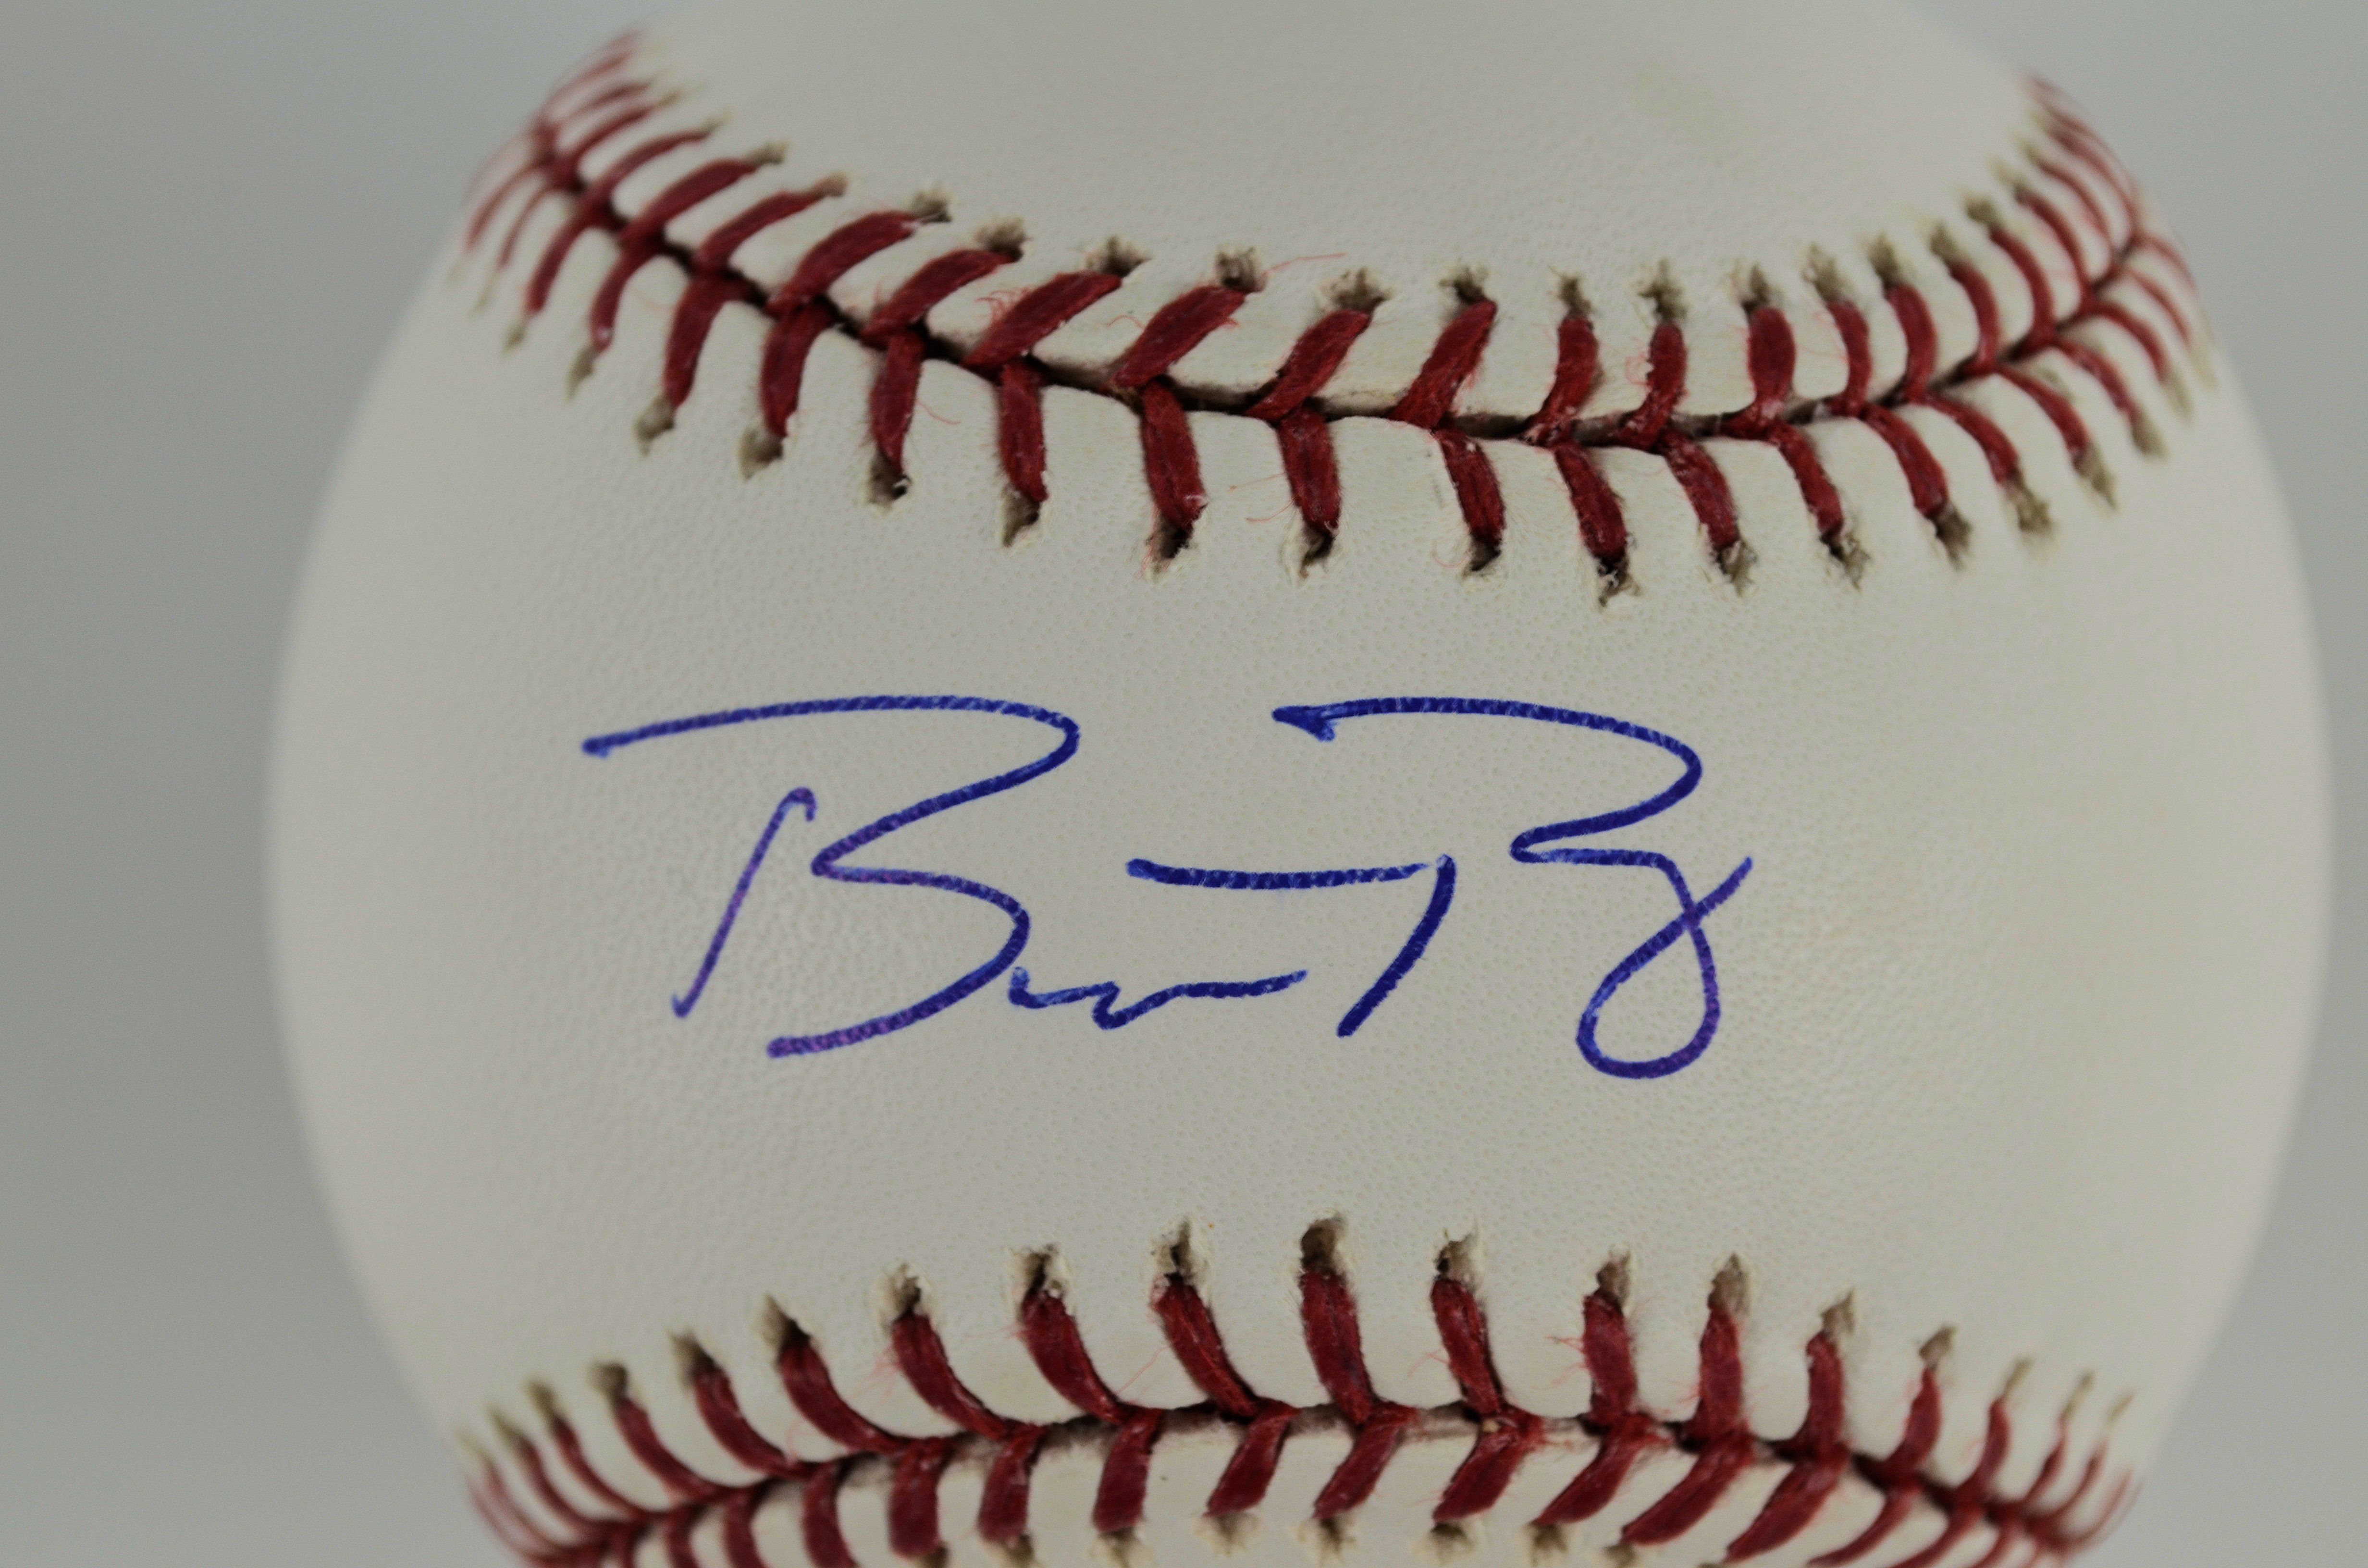 Giants Metallica Auction: Buster Posey Signed 2016 All-Star Game